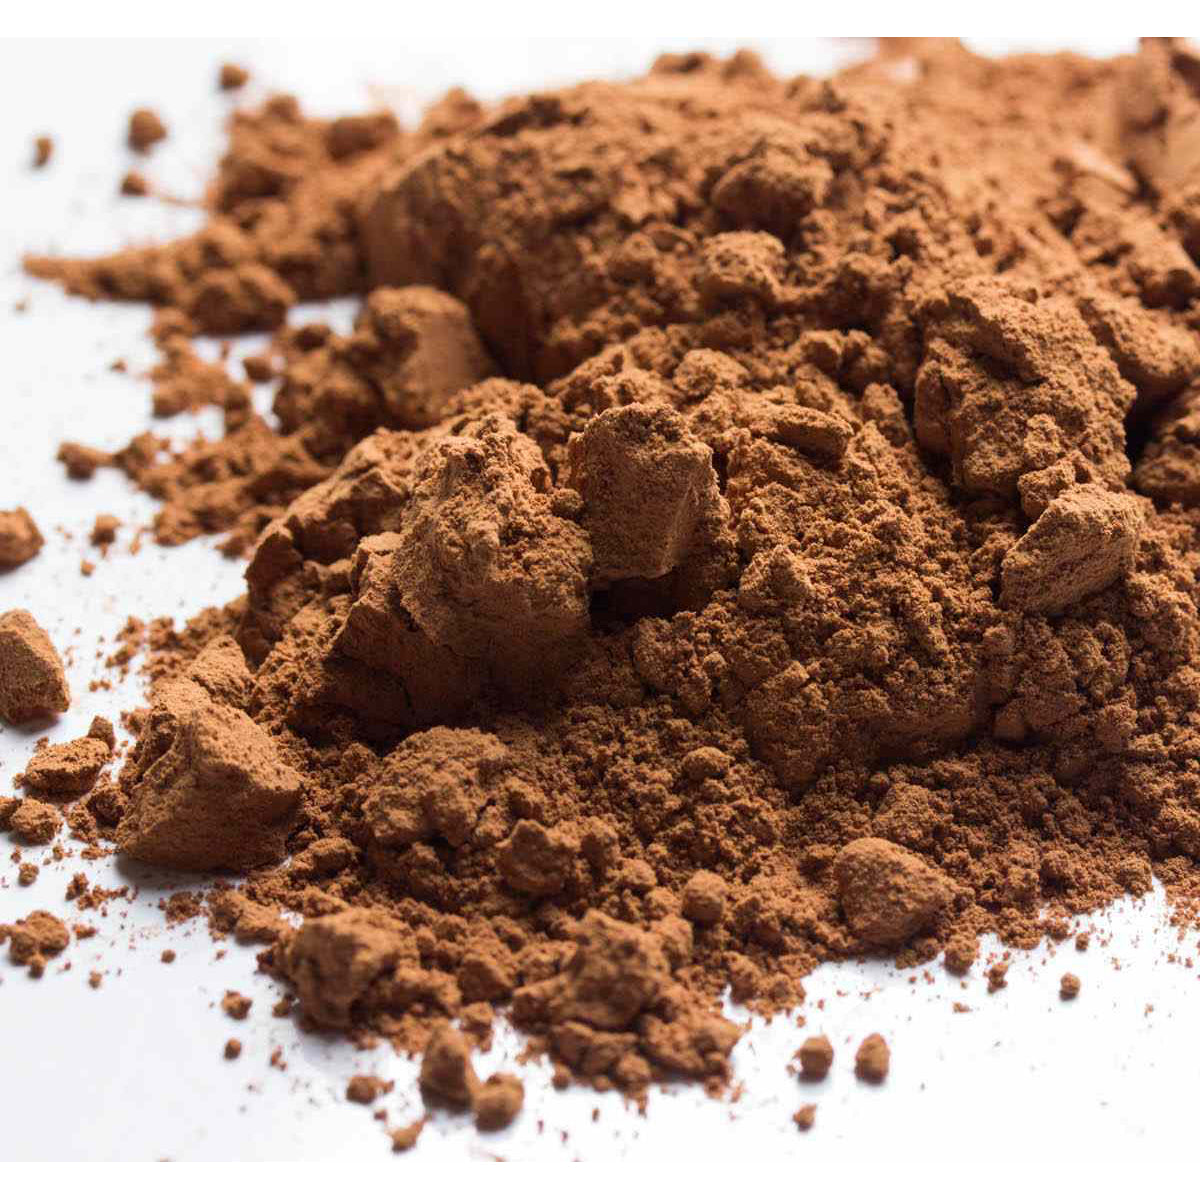 Natural cocoa improves mental performance in young people